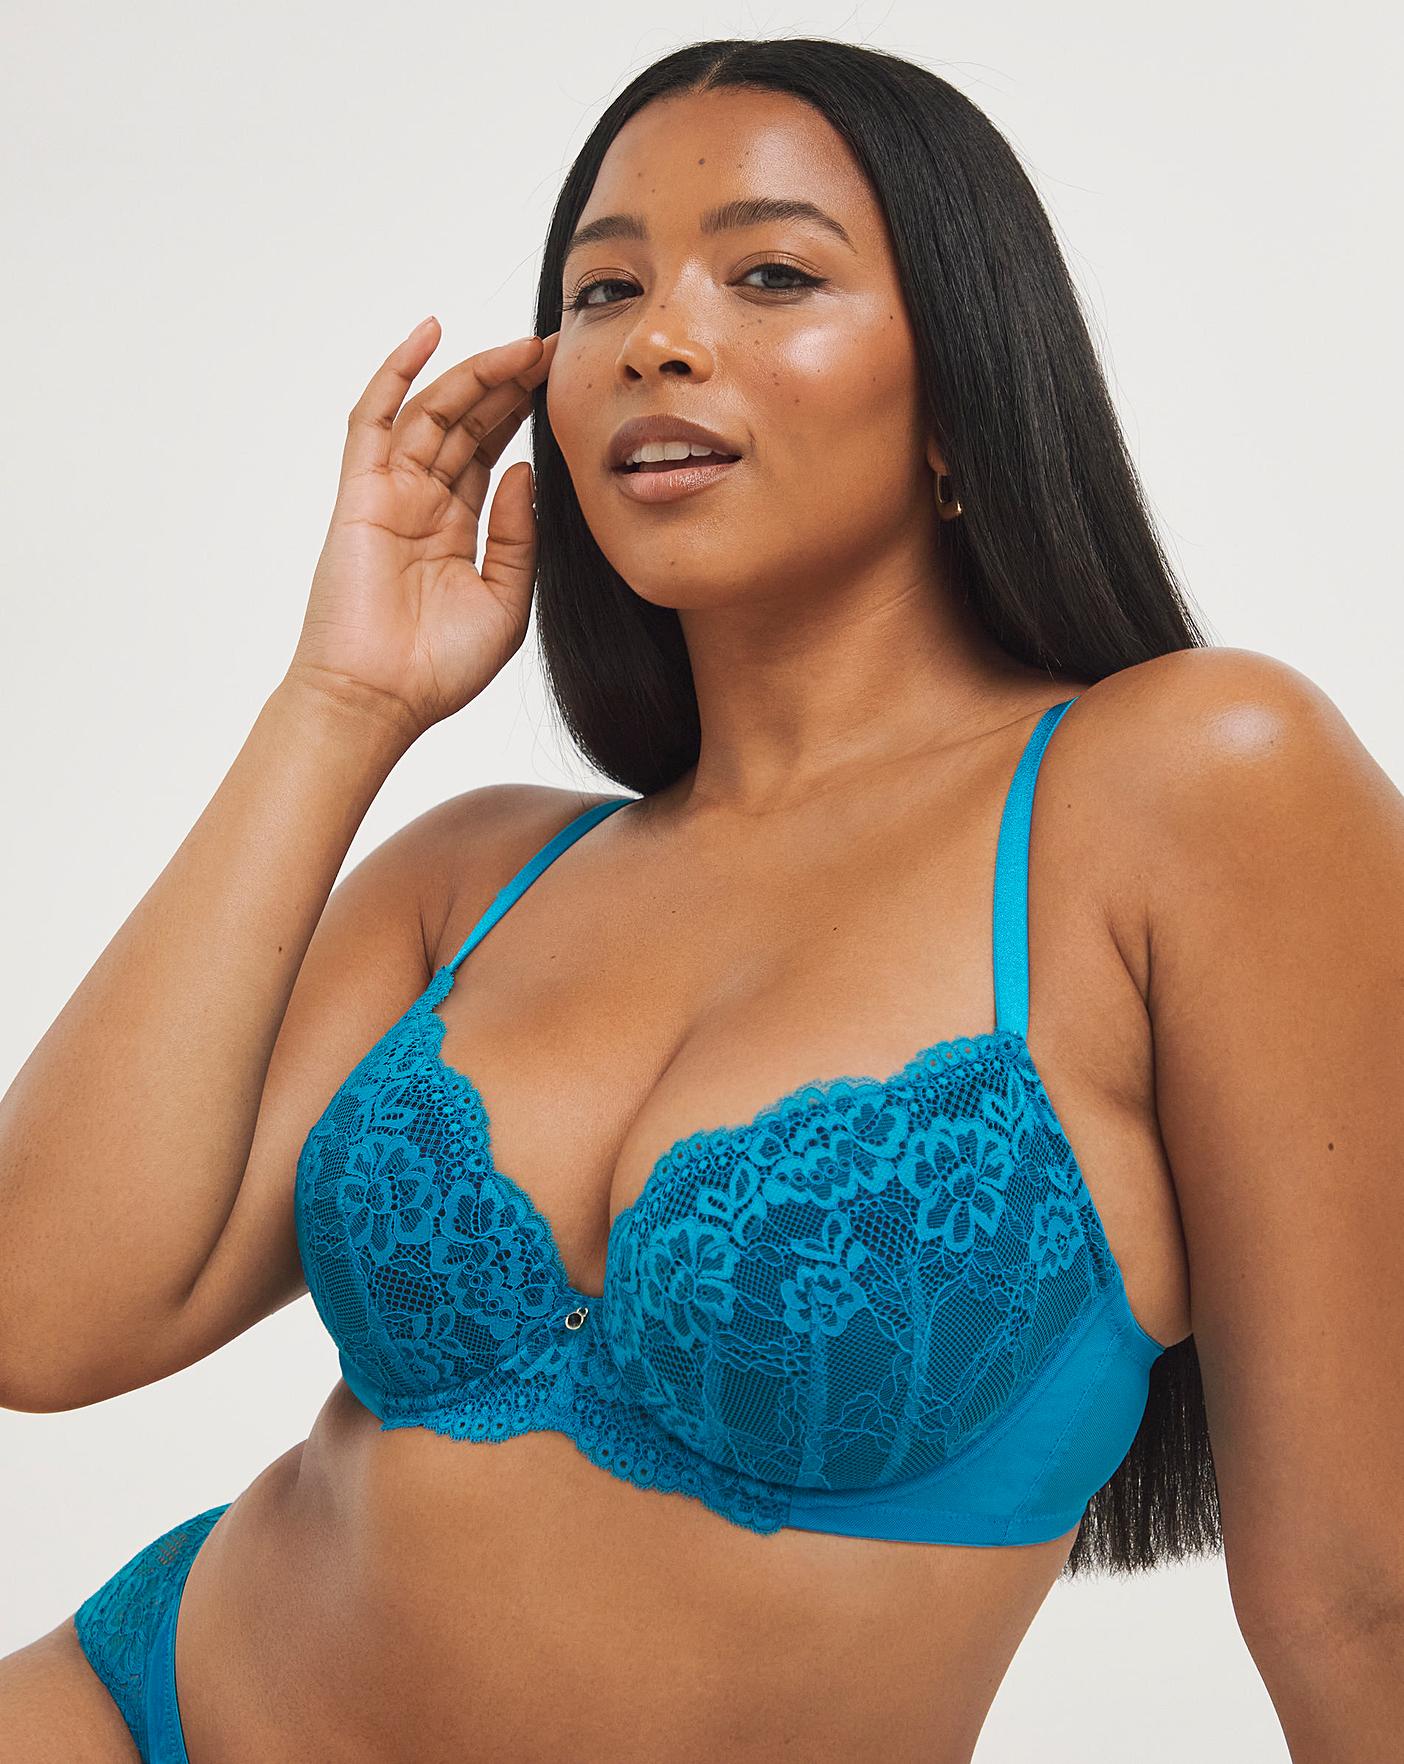 Blue Ann Summers Push-up Bras Size 38G, Padded Bras